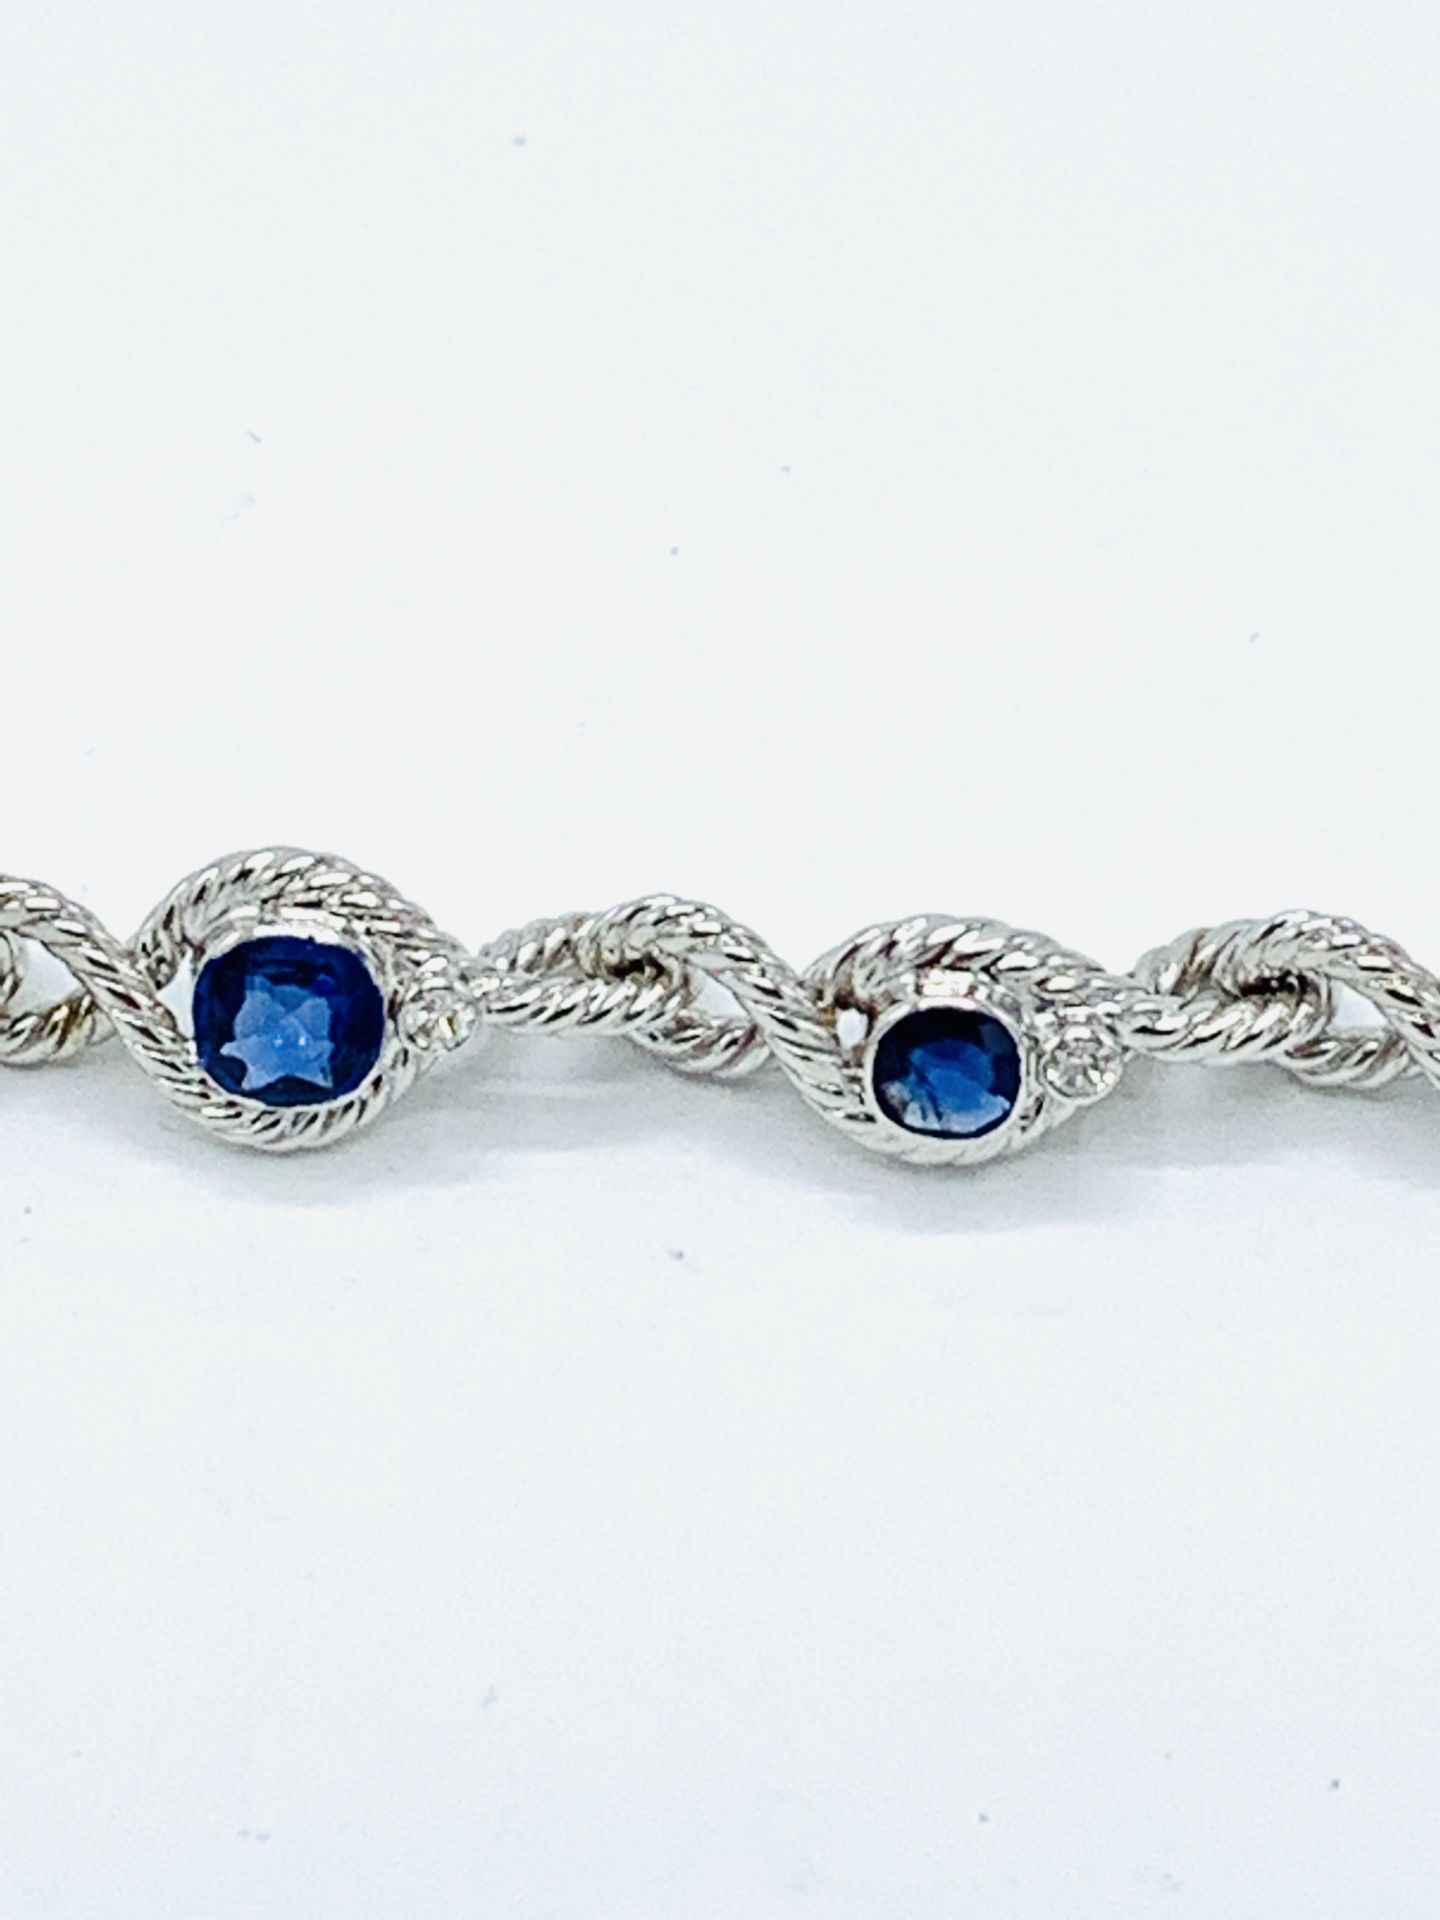 18ct white gold and graduated sapphire twisted bracelet. - Image 8 of 8